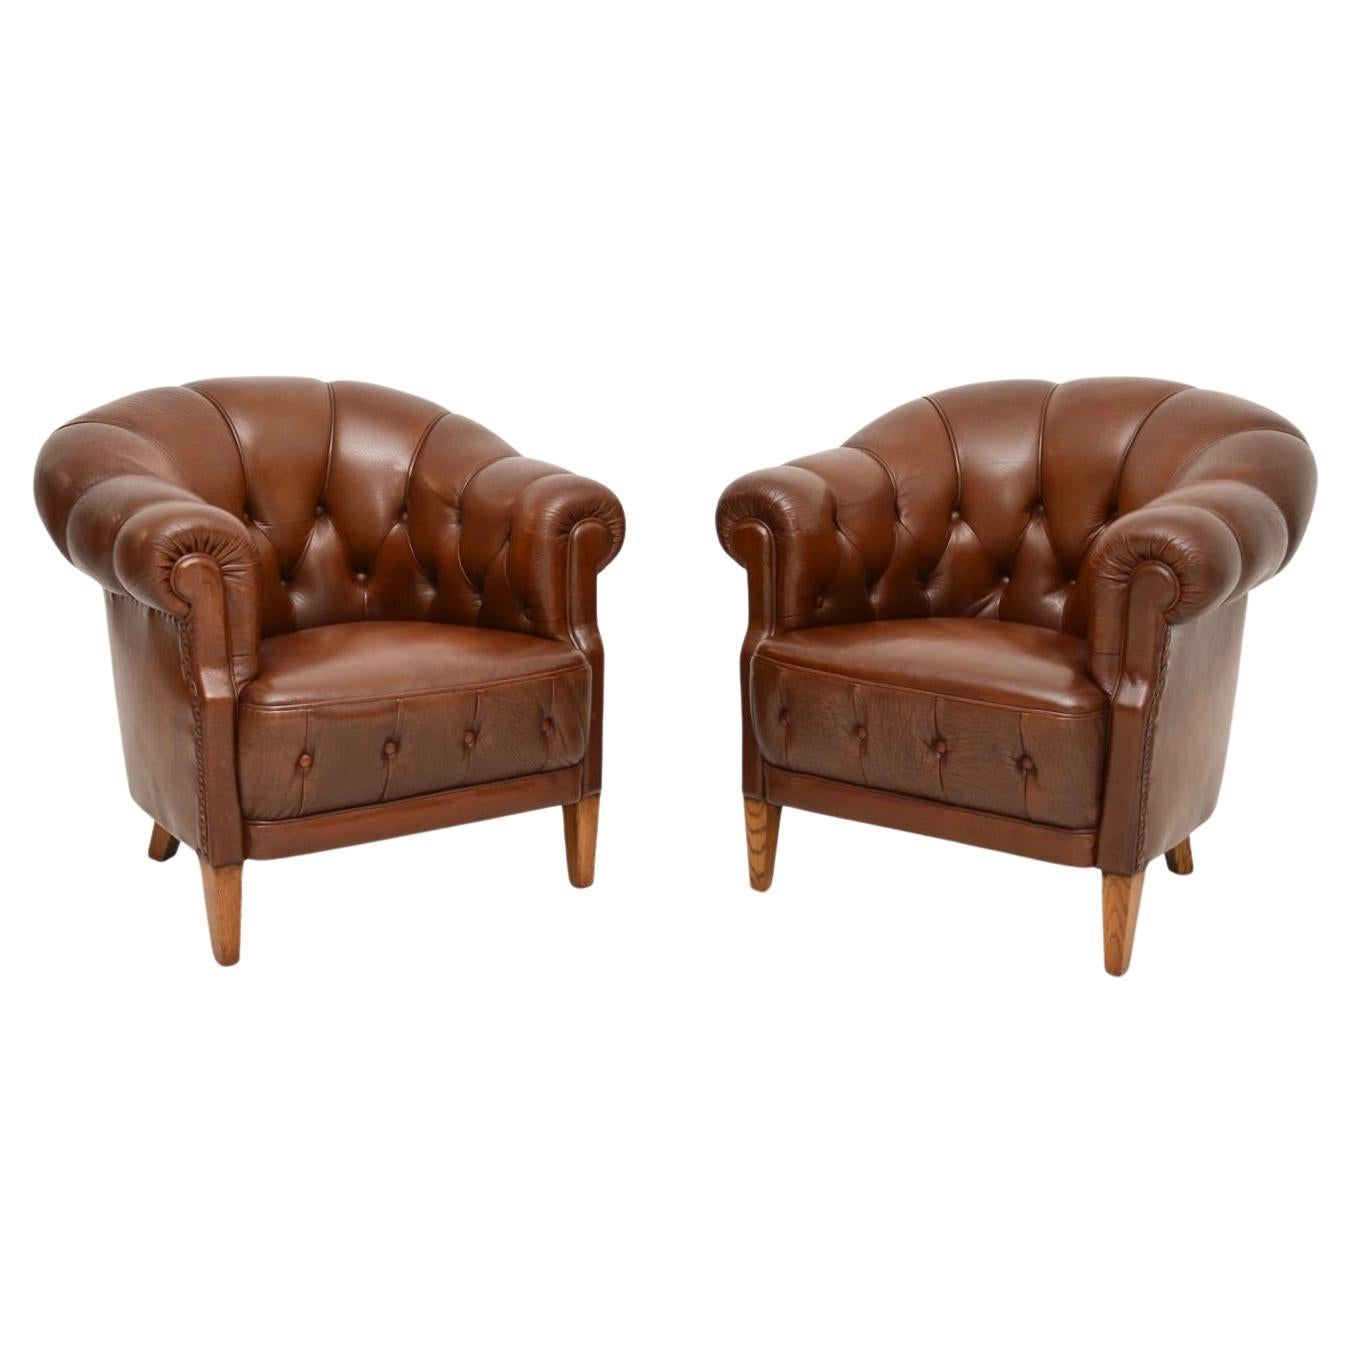 Pair of Antique Swedish Leather Club Armchairs For Sale